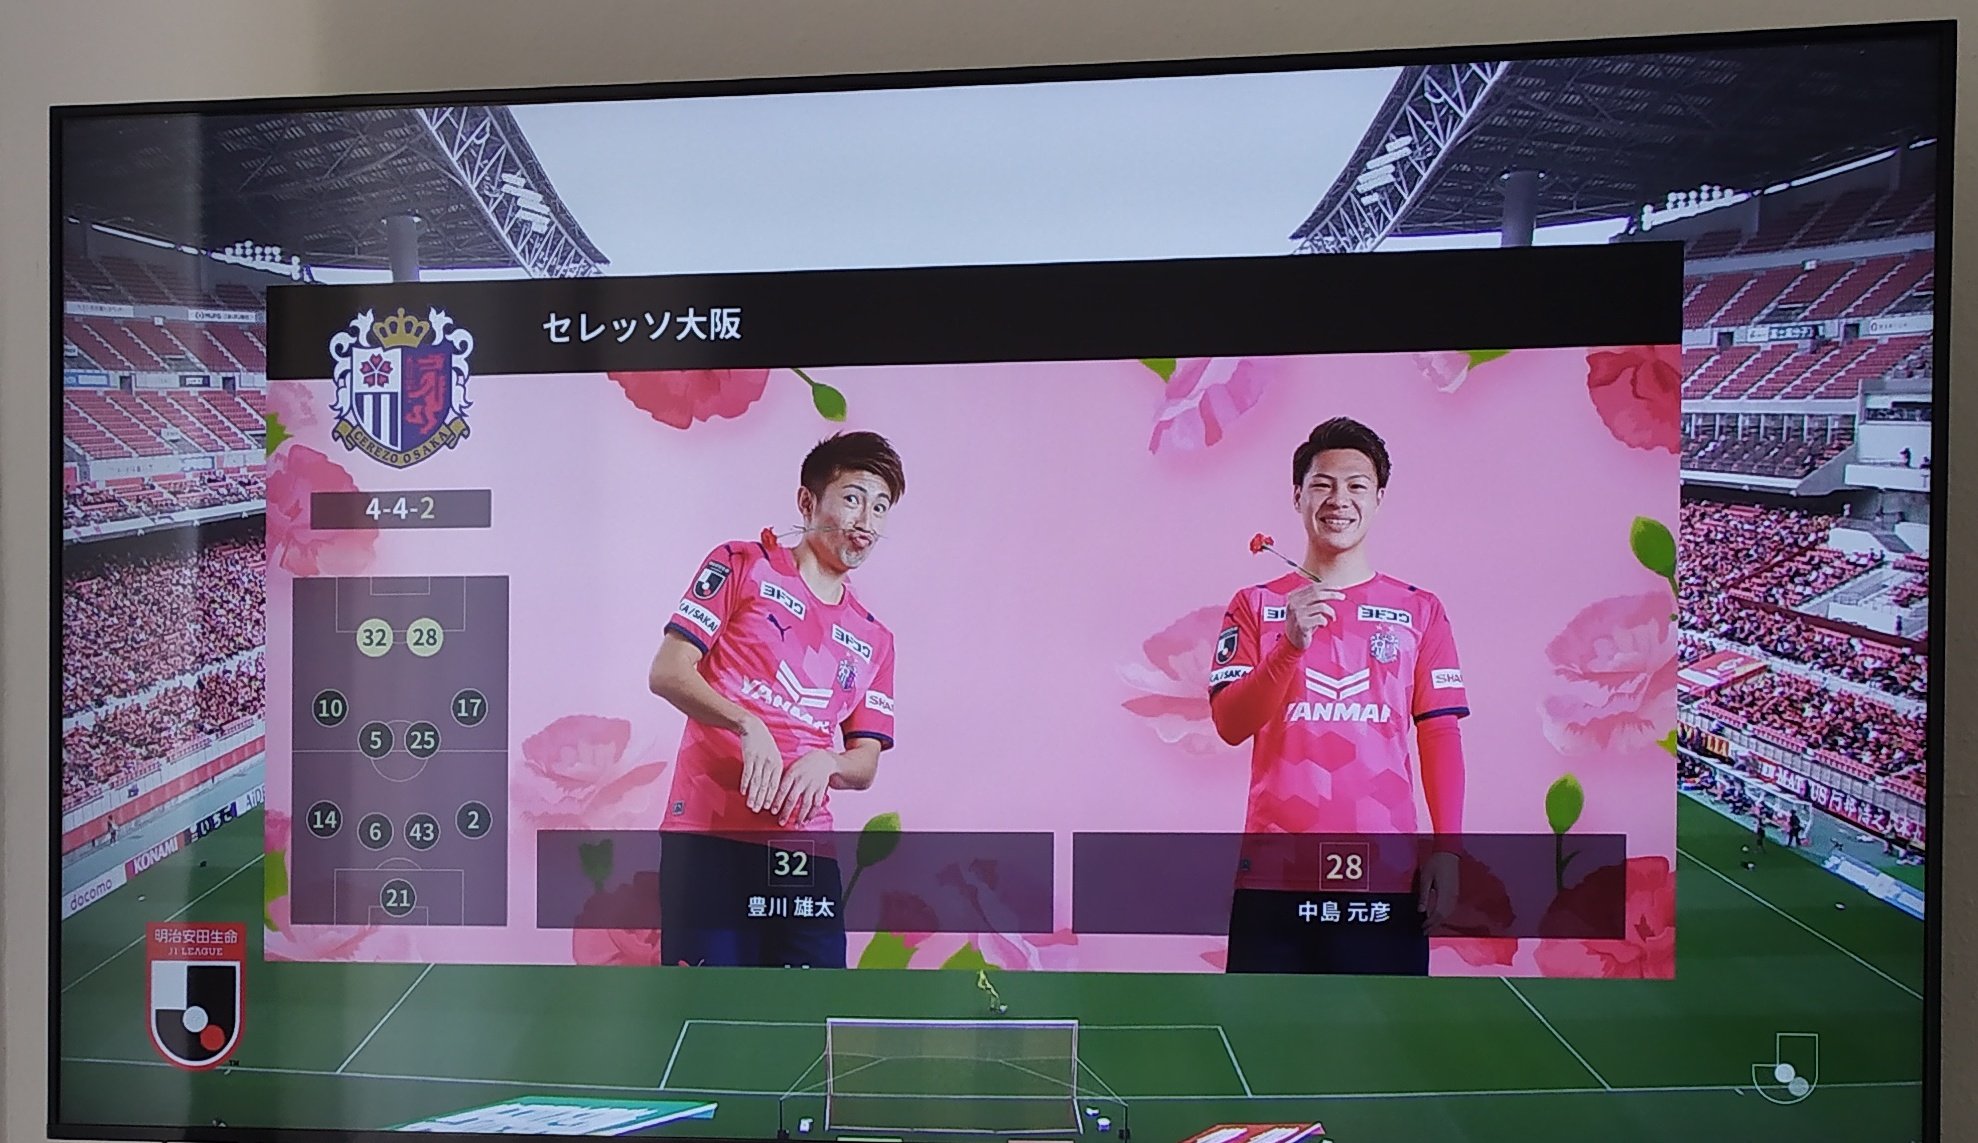 J League Regista Odd Move By Dazn With These Graphics For This Weekend S Matches Via Dazn Jpn Jthoughts T Co Kvq0gy3ayv Twitter